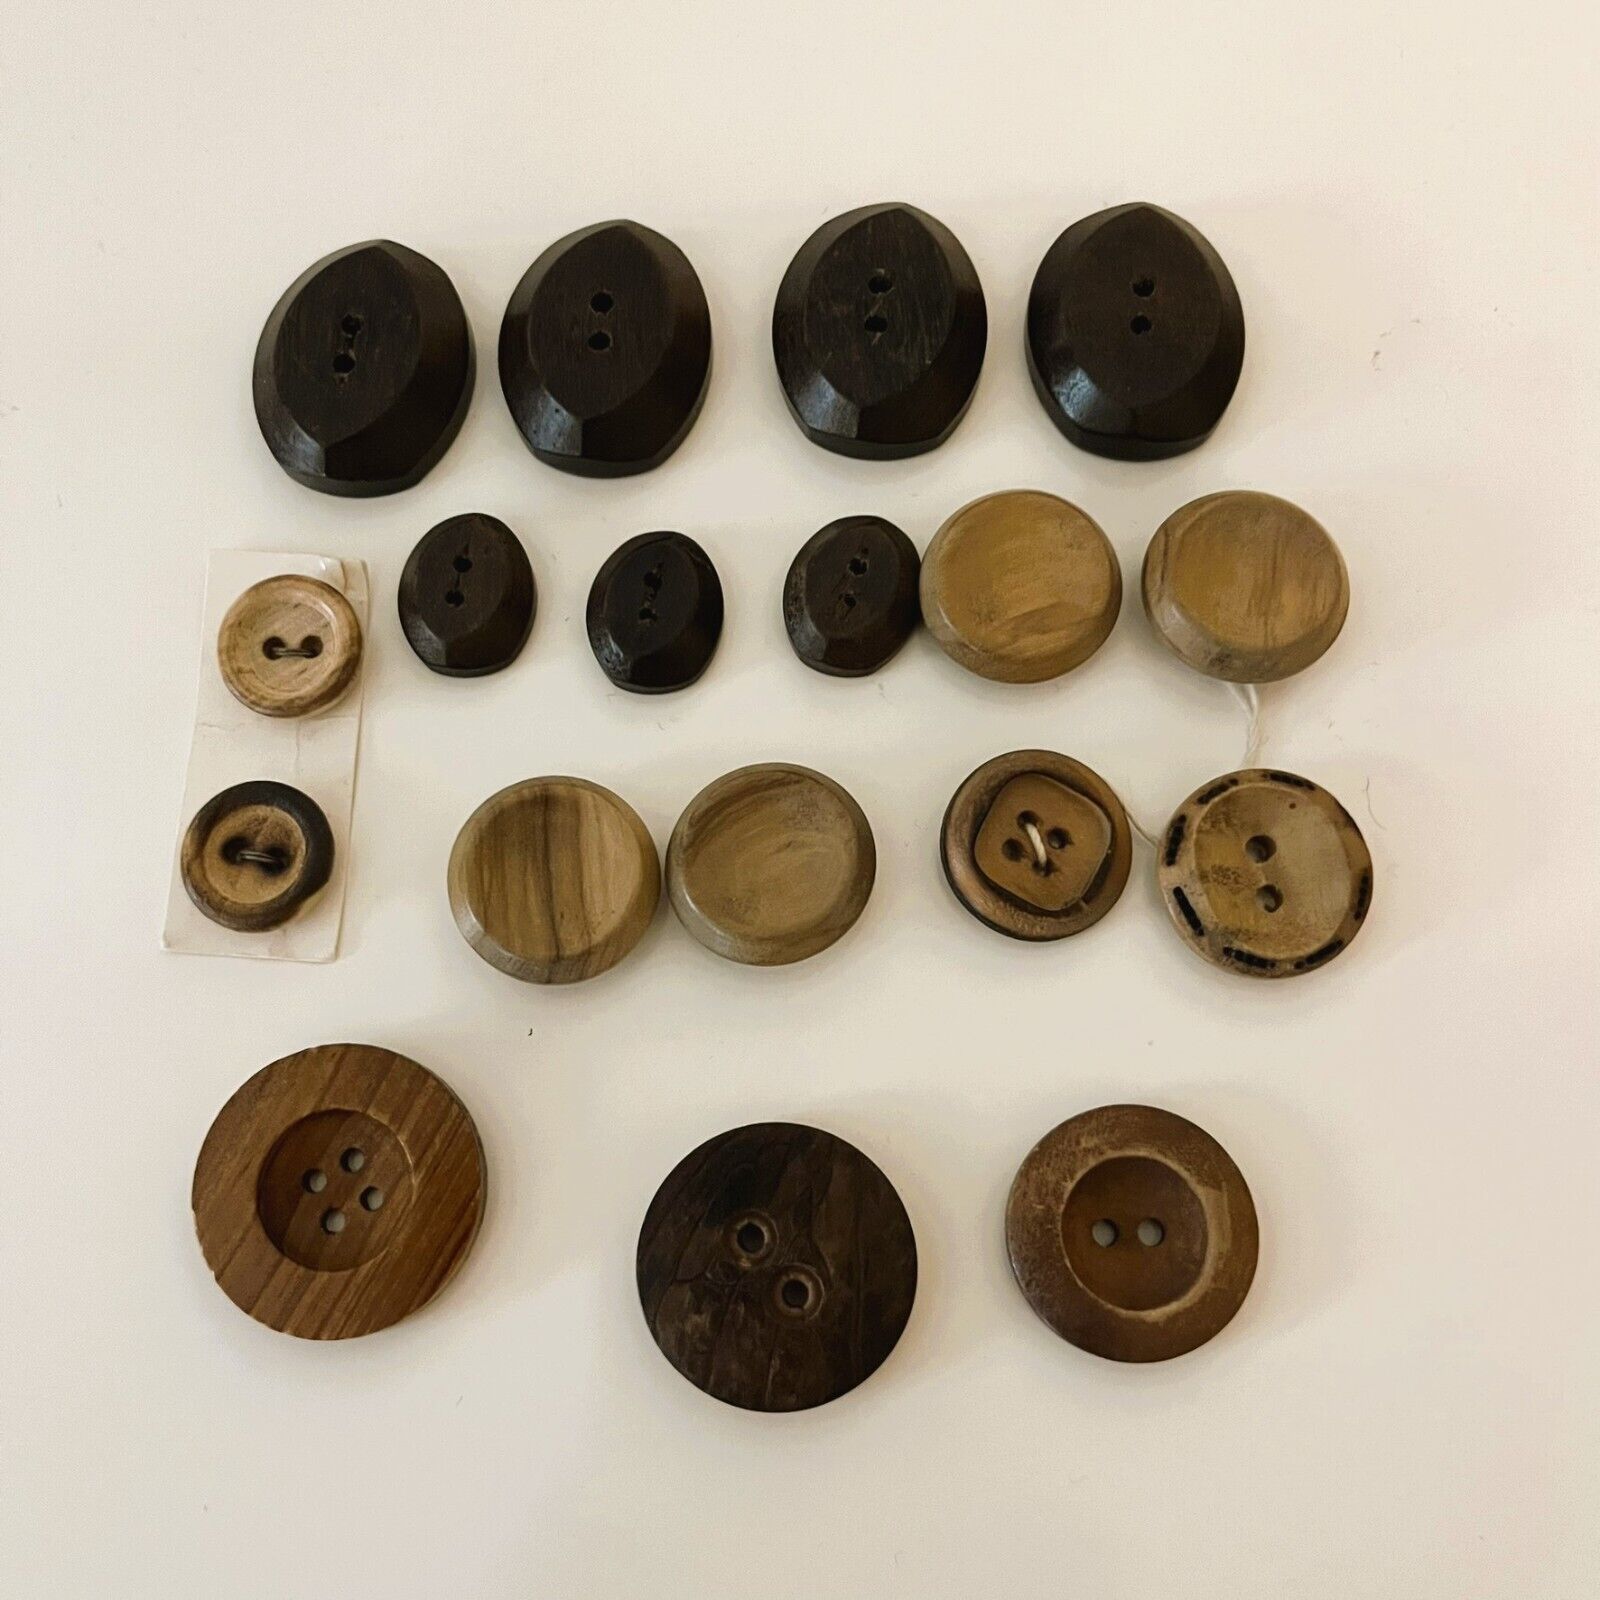 Nice Lot of Vintage Wood Buttons, some matching buttons